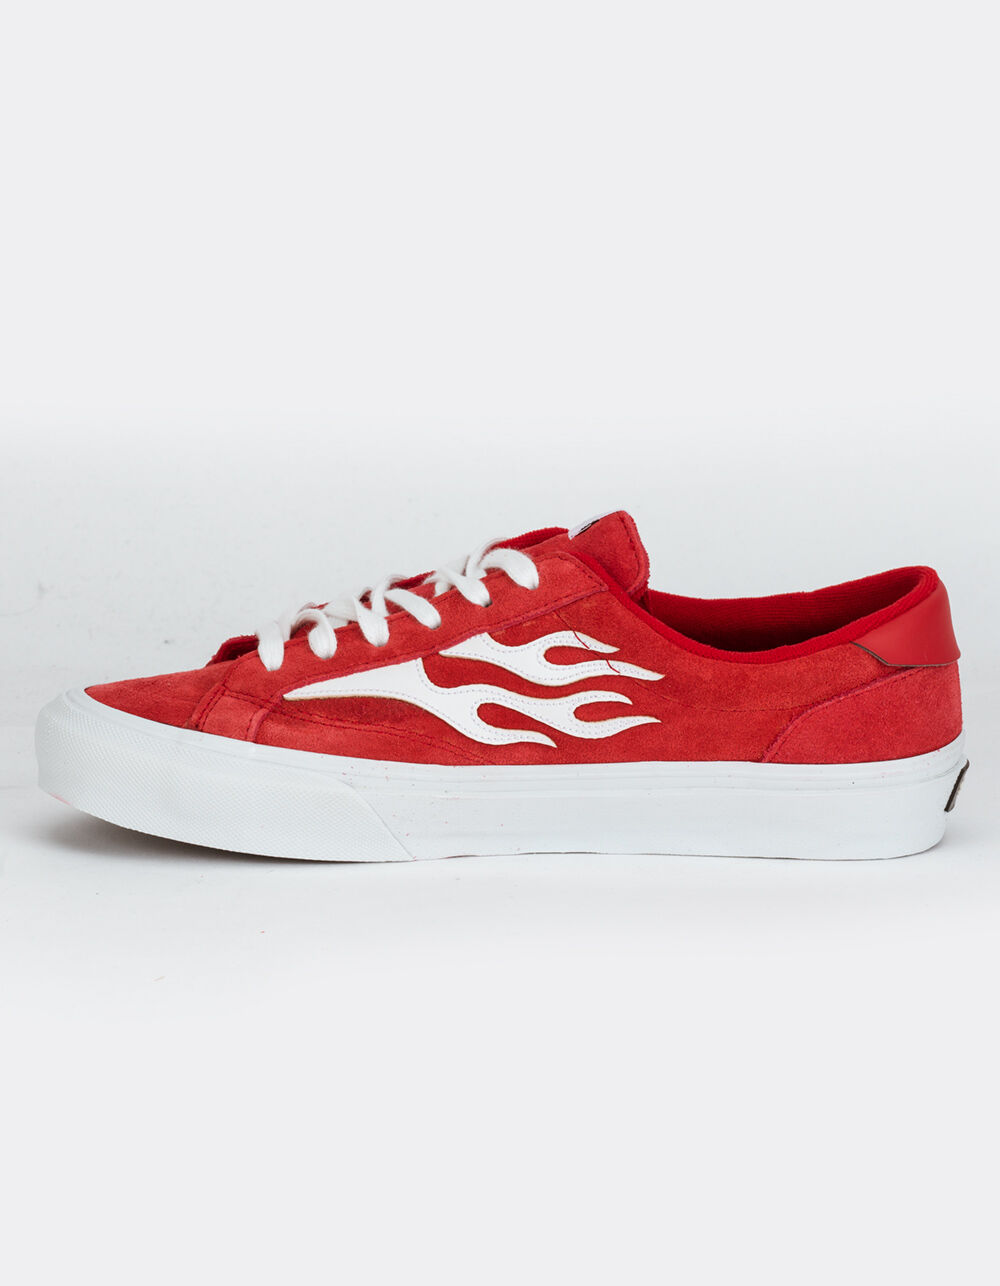 STRAYE Logan Flame Suede Mens Shoes - RED/WHITE | Tillys